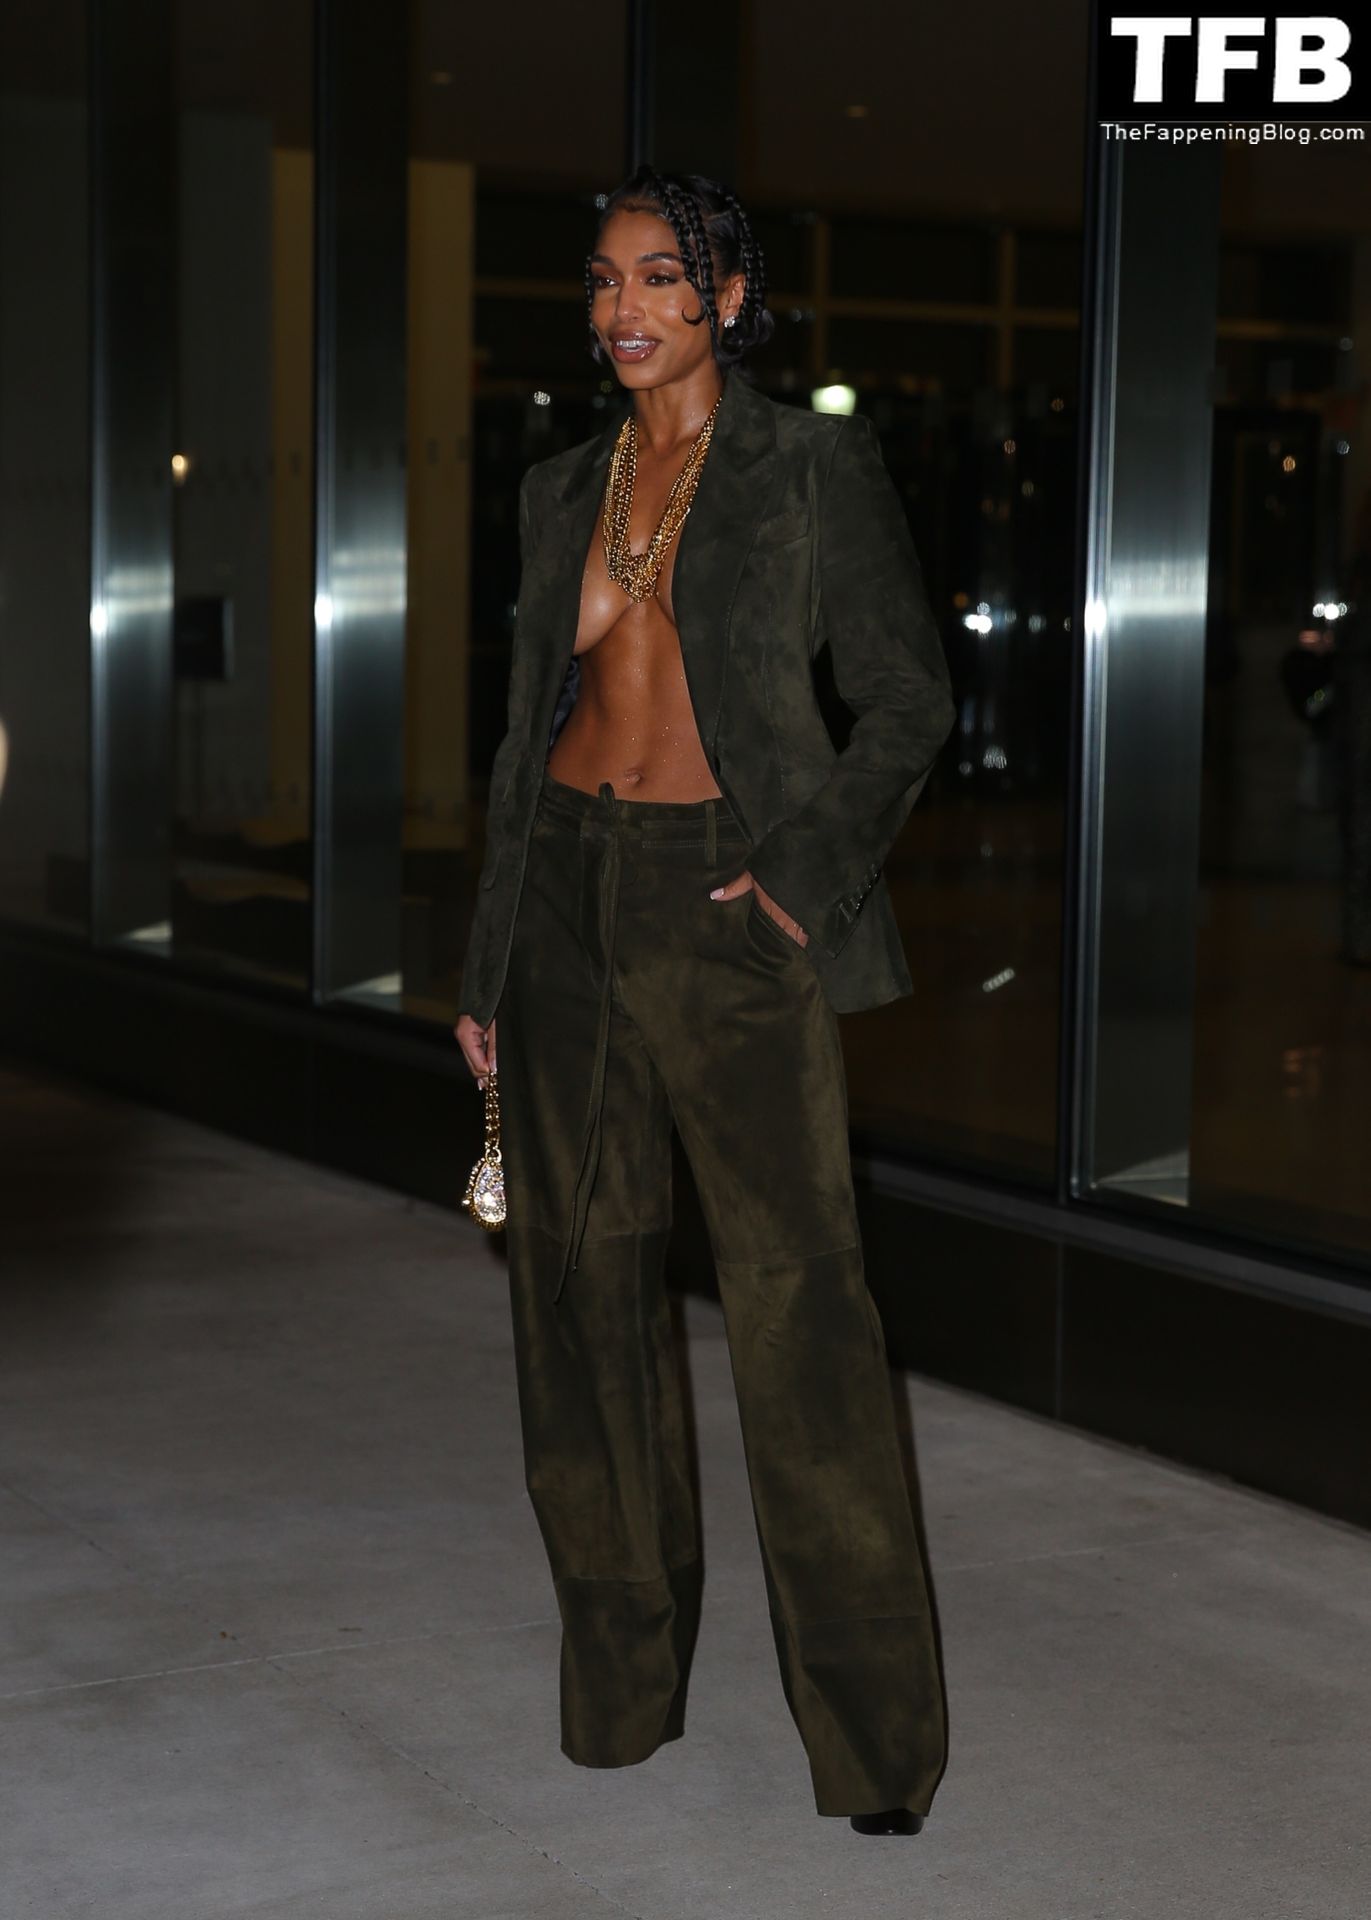 Lori Harvey Sexy The Fappening Blog 10 - Lori Harvey Shows Off Her Tits at the Tom Ford Fashion Show (38 Photos)